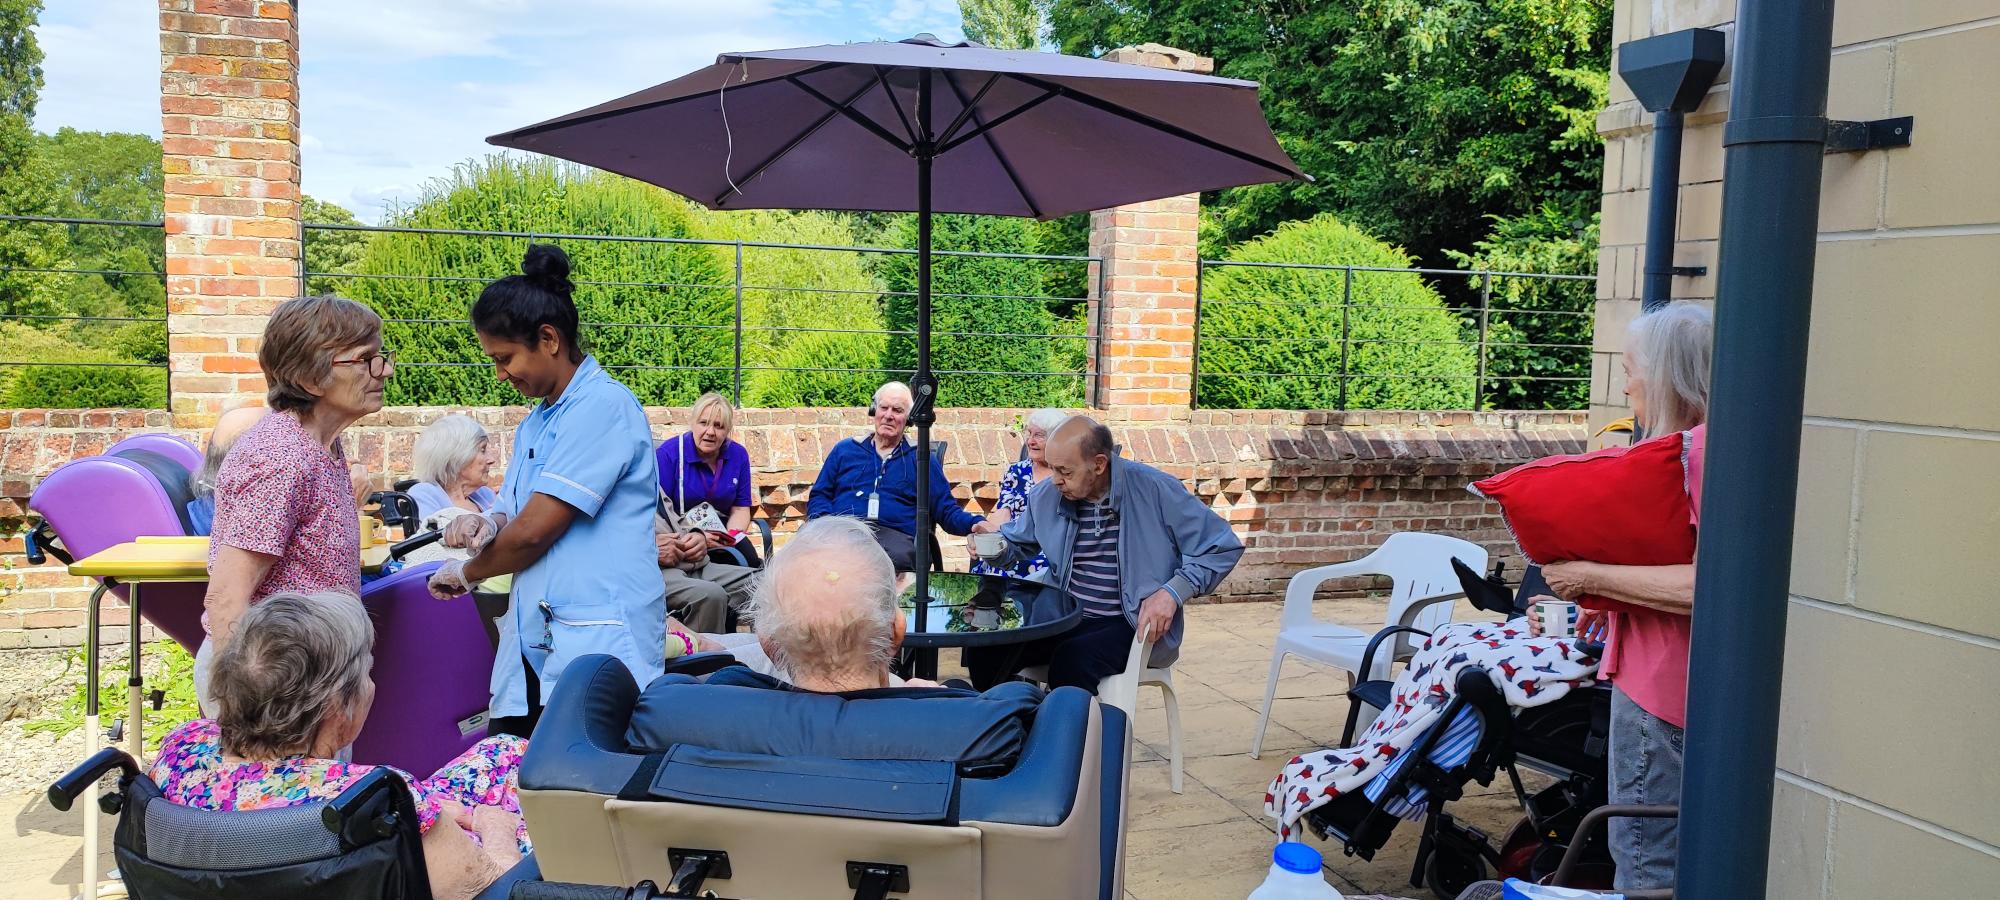 Residents in the garden having a cup of tea under a umbrella. A carer helping a resident.